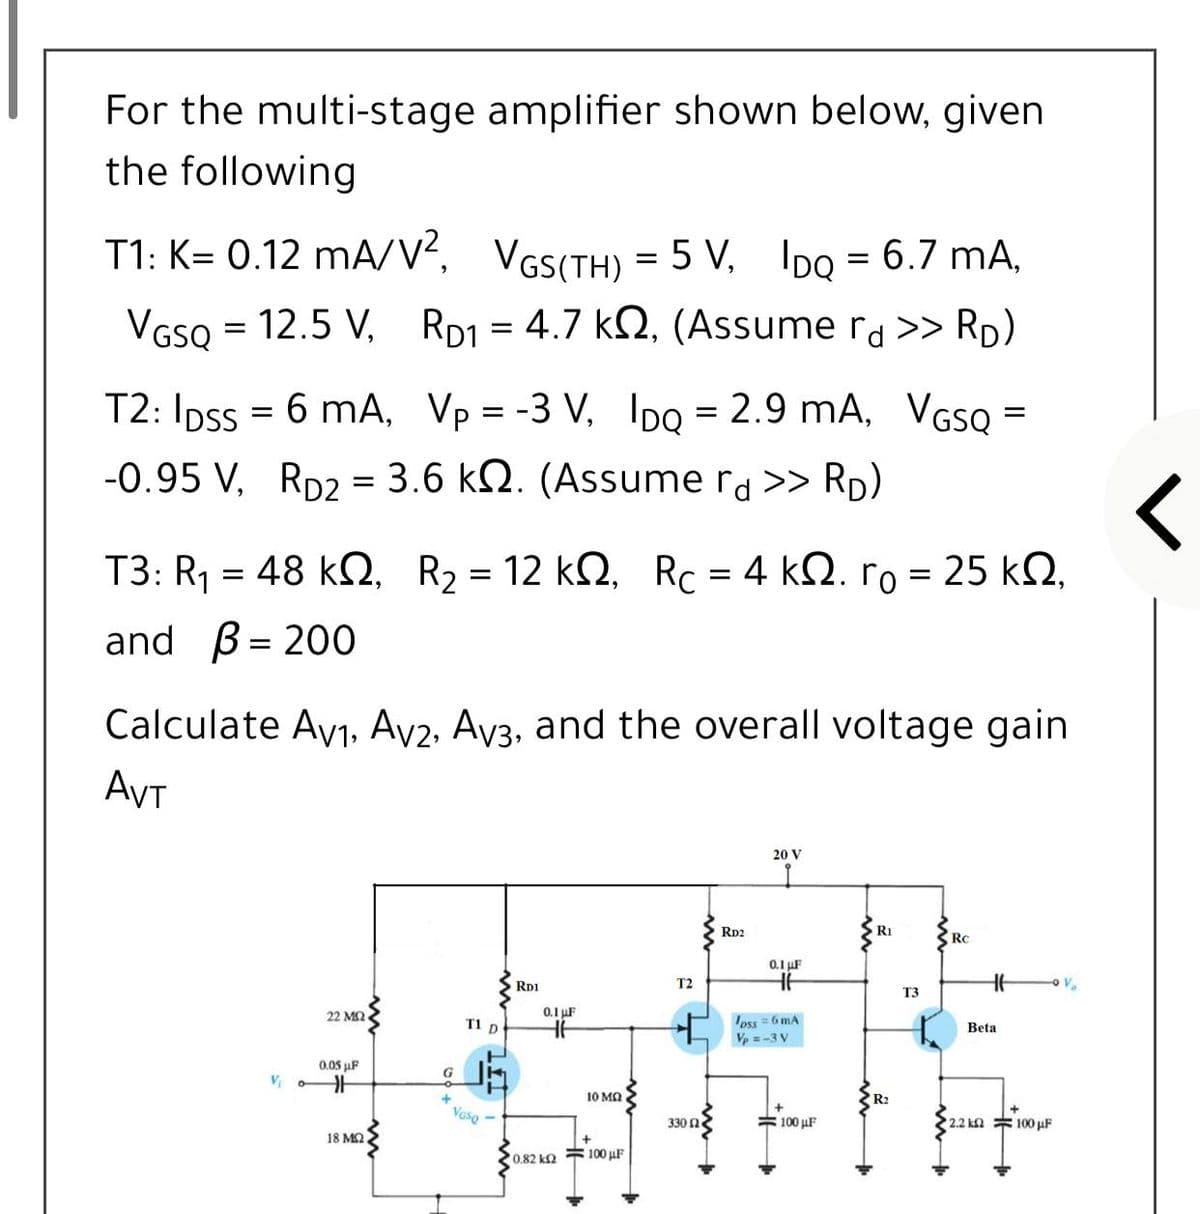 For the multi-stage amplifier shown below, given
the following
T1: K= 0.12 mA/V?, VGS(TH) = 5 V, IDo = 6.7 mA,
VGSQ = 12.5 V, RD1 = 4.7 k2, (Assume ra >> RD)
T2: Ipss = 6 mA, Vp = -3 V, 1IDO = 2.9 mA, VGs =
%3D
-0.95 V, RD2 = 3.6 kN. (Assume ra >> RD)
T3: R48 ΚΩ, R,-12 kΩ RC4 kΩ. ro-25 ΚΩ.
and
B= 200
Calculate Av1, Av2, Ay3, and the overall voltage gain
AVT
20 V
Rp2
RI
RC
0.1 uF
RD1
T2
V.
T3
22 MQ
0.1 uF
oss =6 mA
V =-3 V
T1 D
Beta
0.05 µF
G
10 MQ
R2
Vaso -
330 Ω
#100 uF
2.2 kn 100 µF
18 M2
0.82 k2 100 uF
